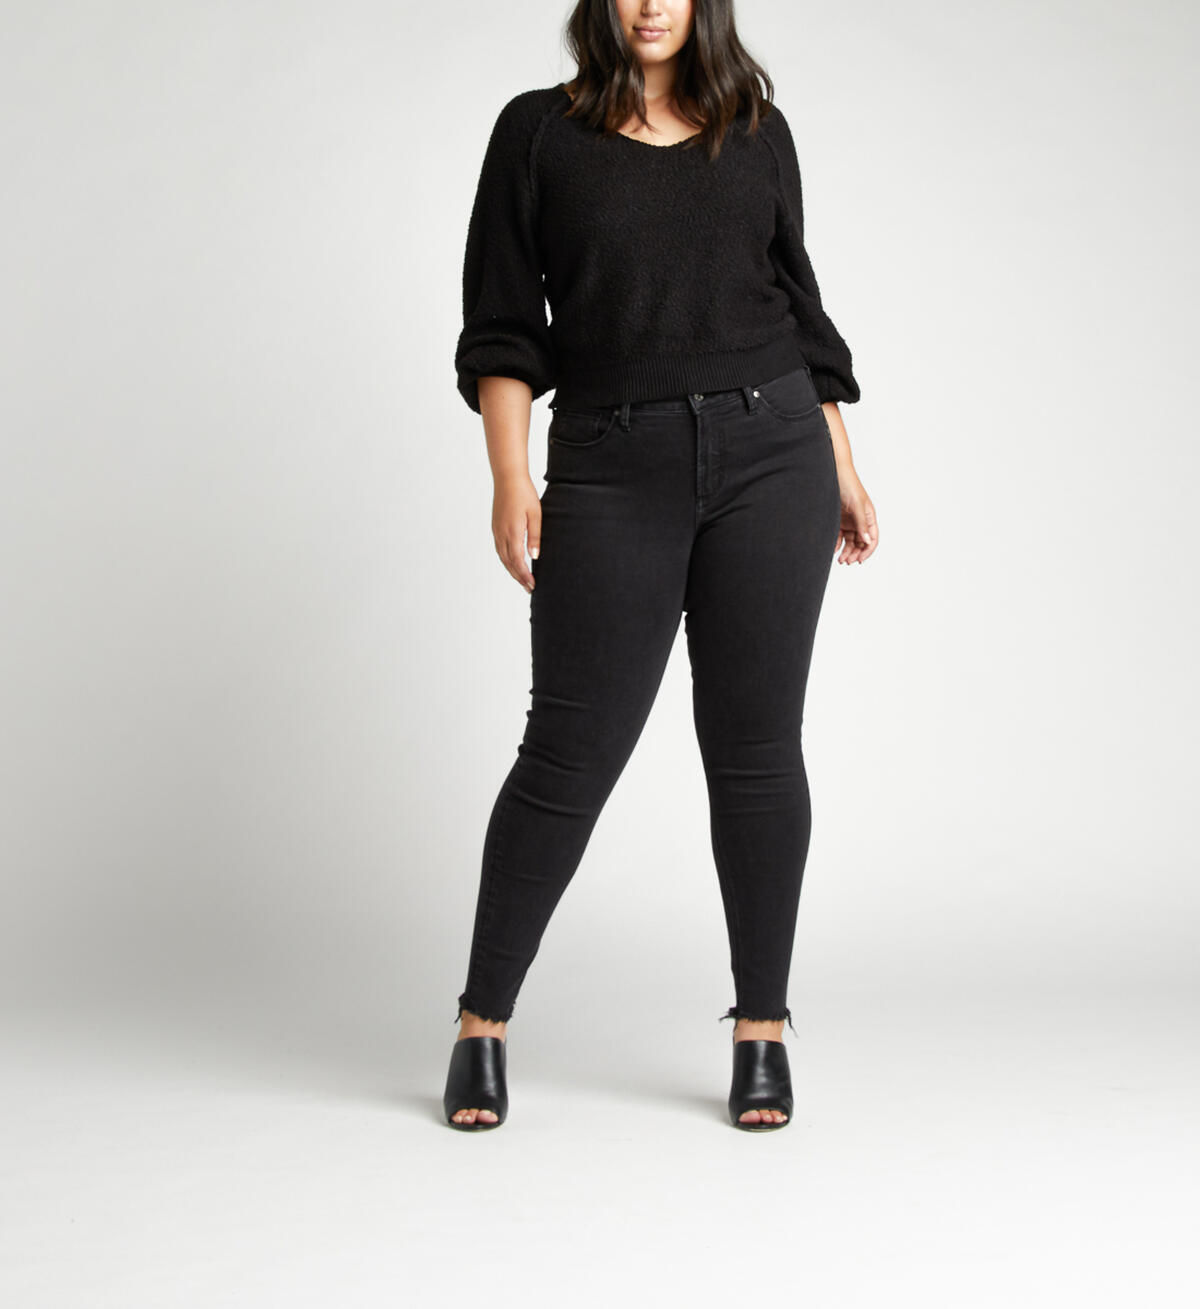 Avery High Rise Skinny Plus Size Jeans, , hi-res image number 0